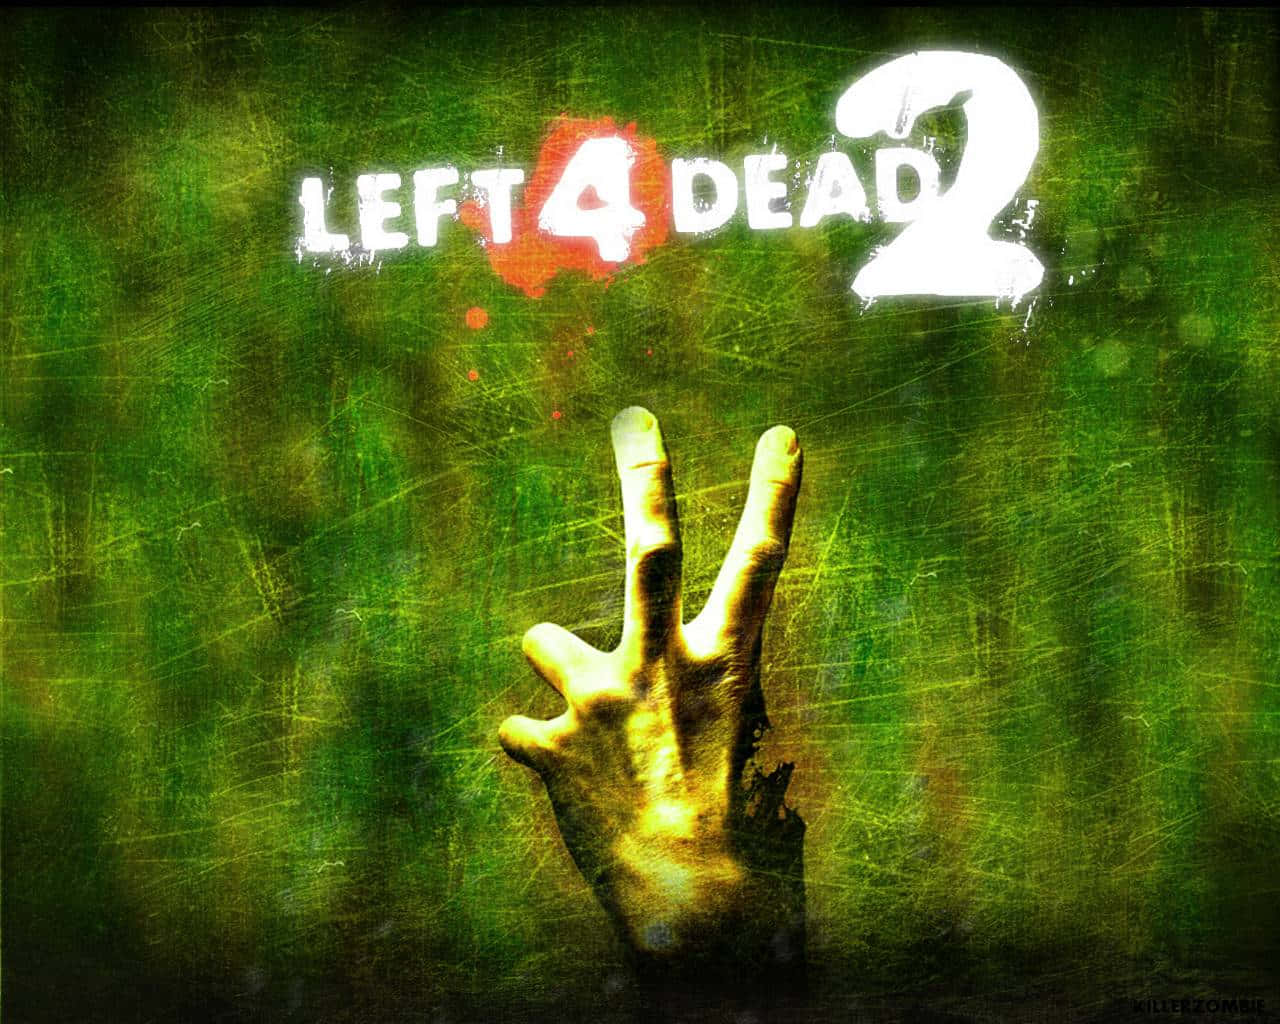 Epic Poster Of Left 4 Dead Zombie Game Wallpaper